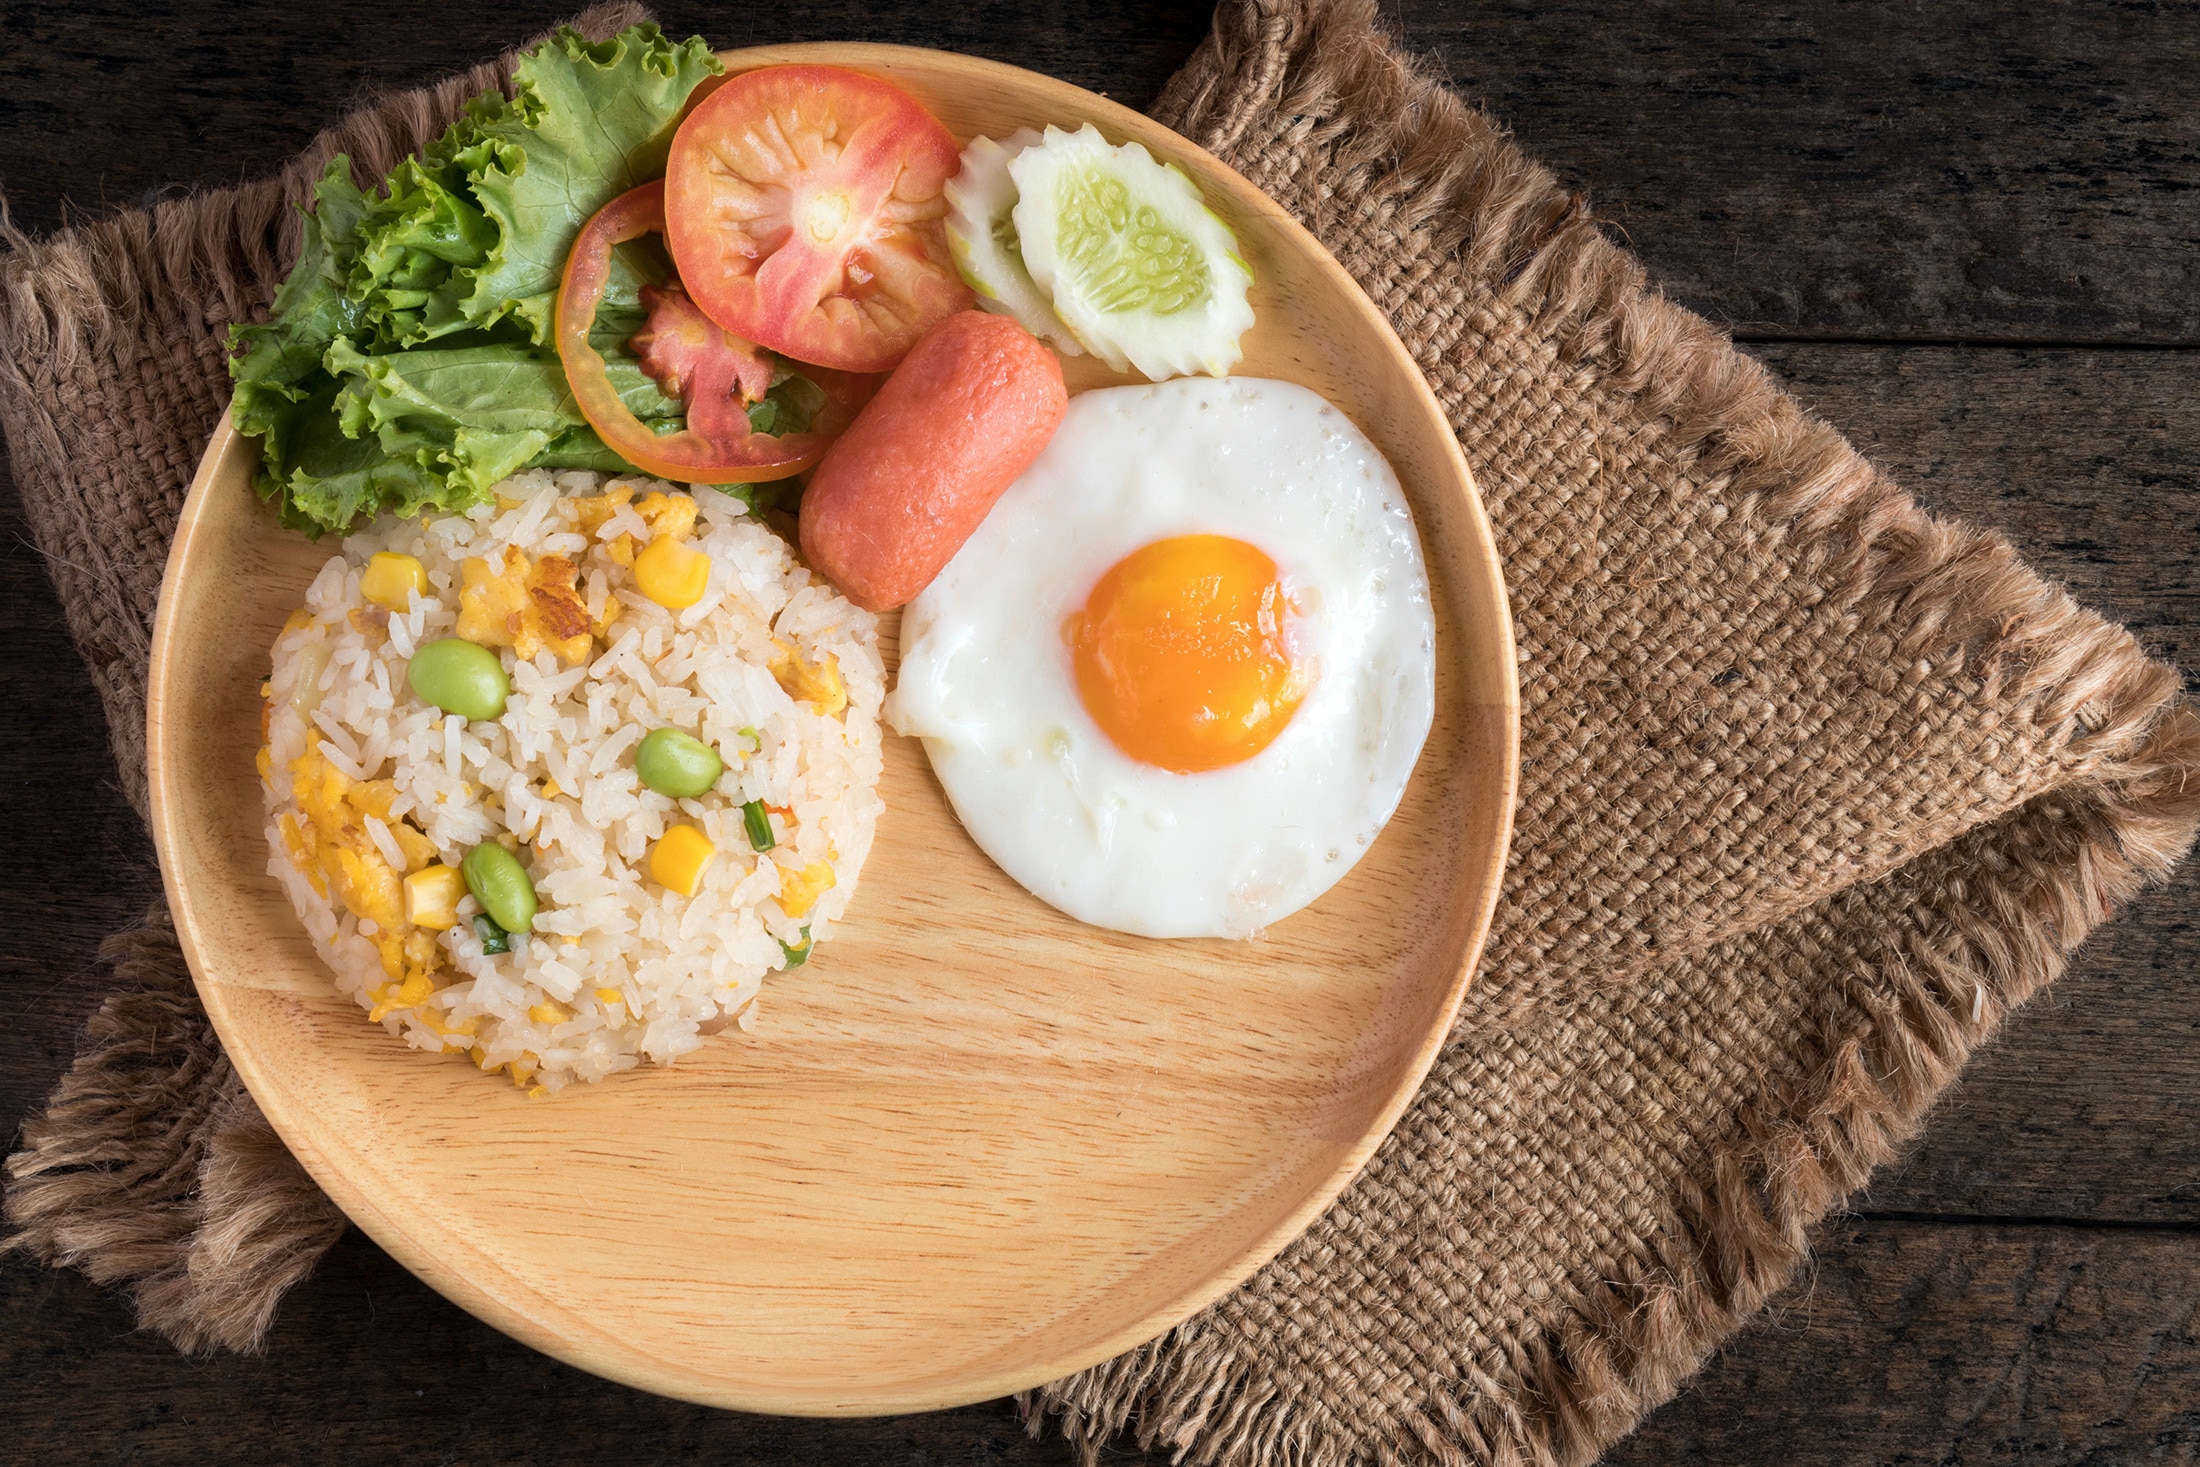 Egg fried rice with a side of fried egg, sausage, and vegetables